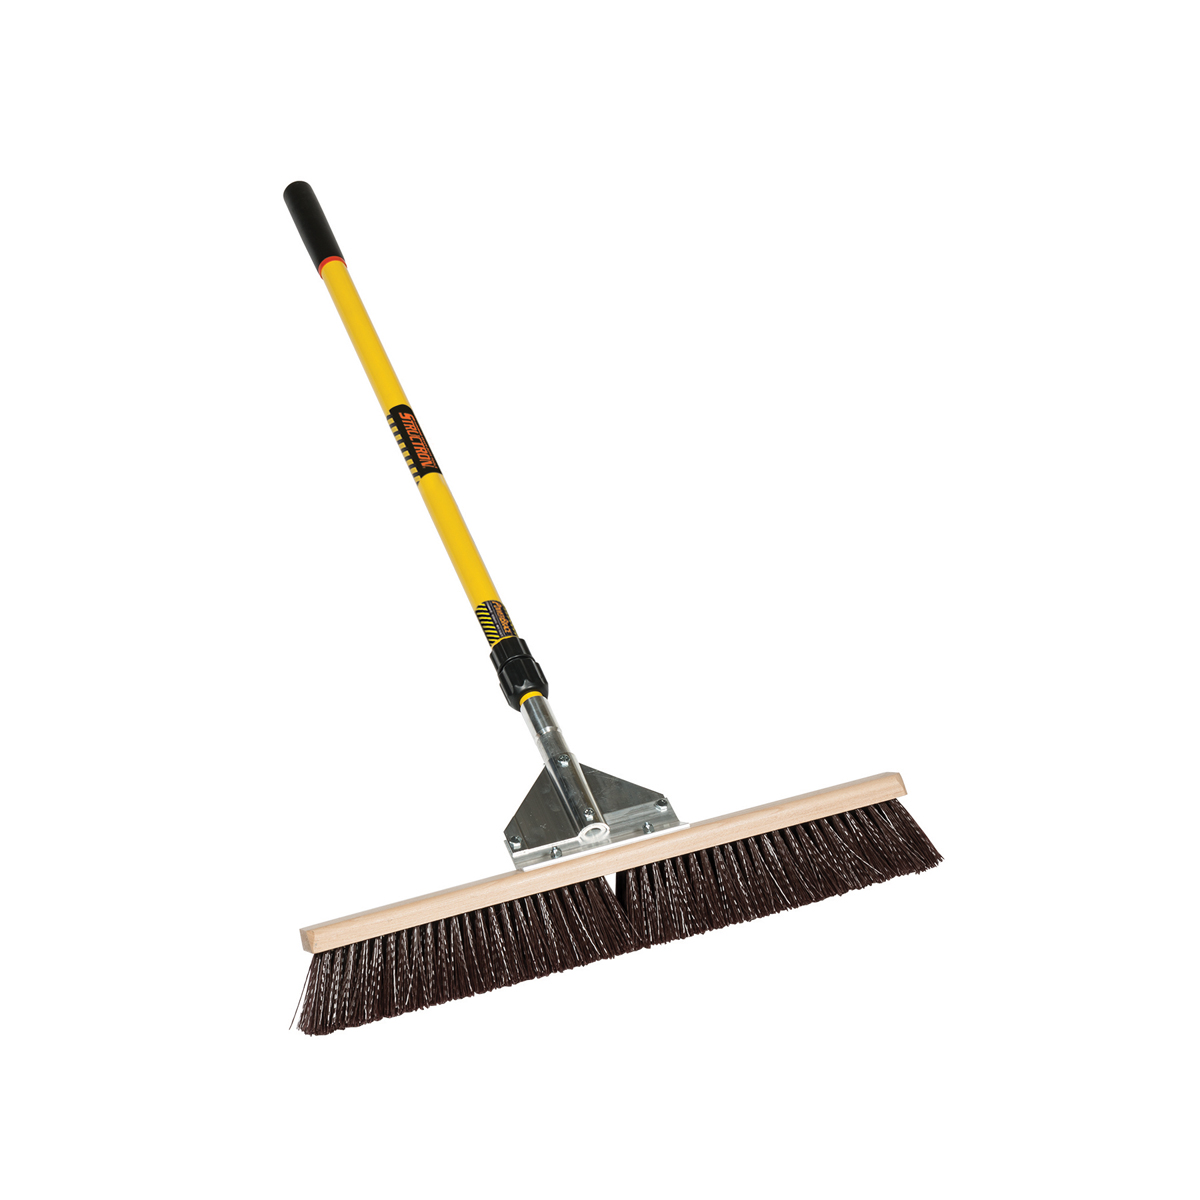 Broom With Handle